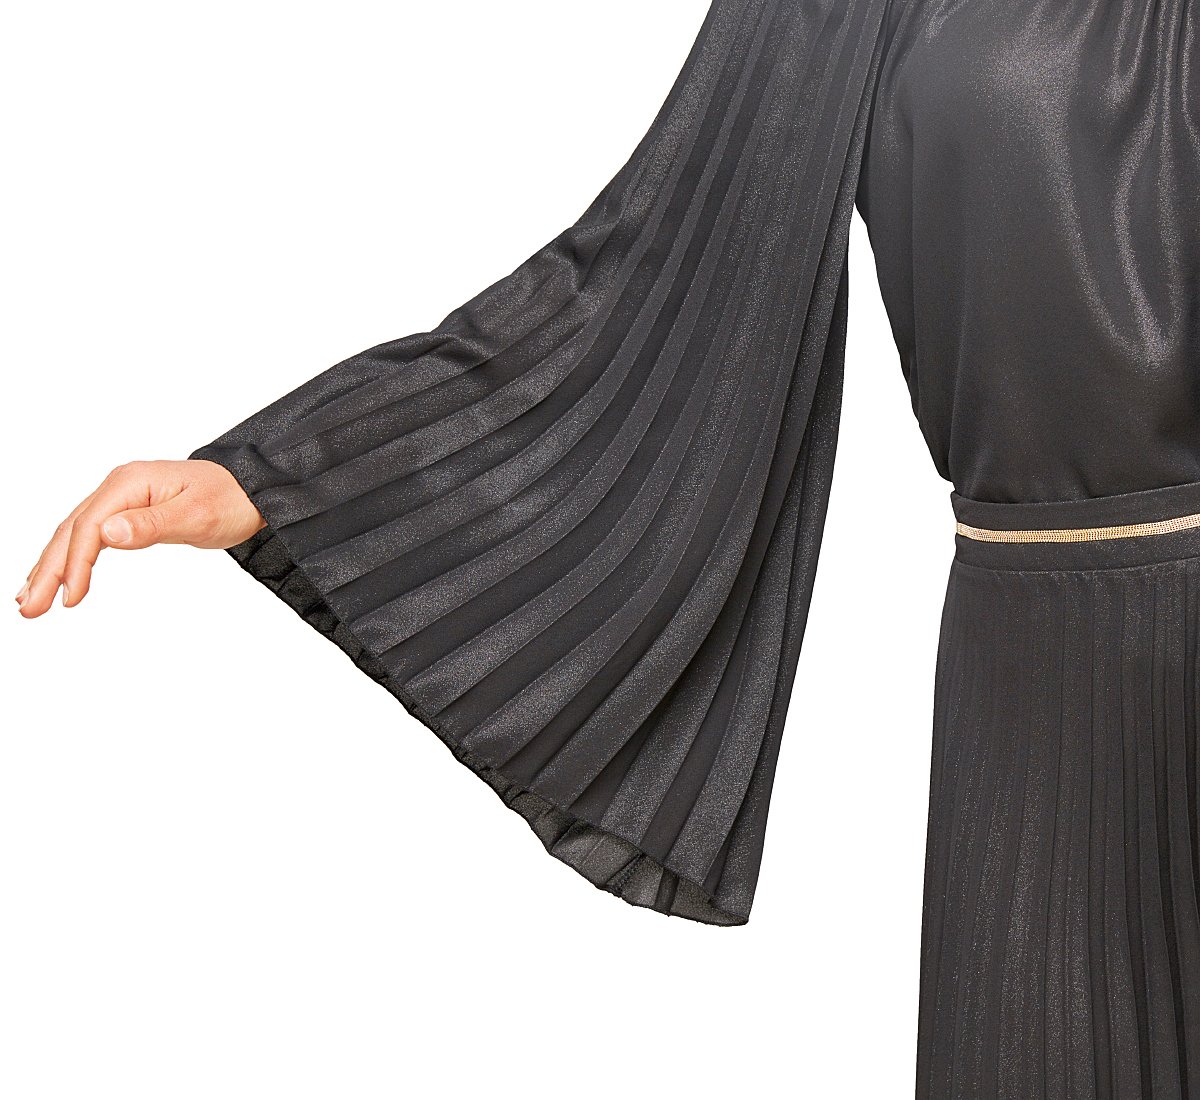 One-shoulder, pleated fabric sweater